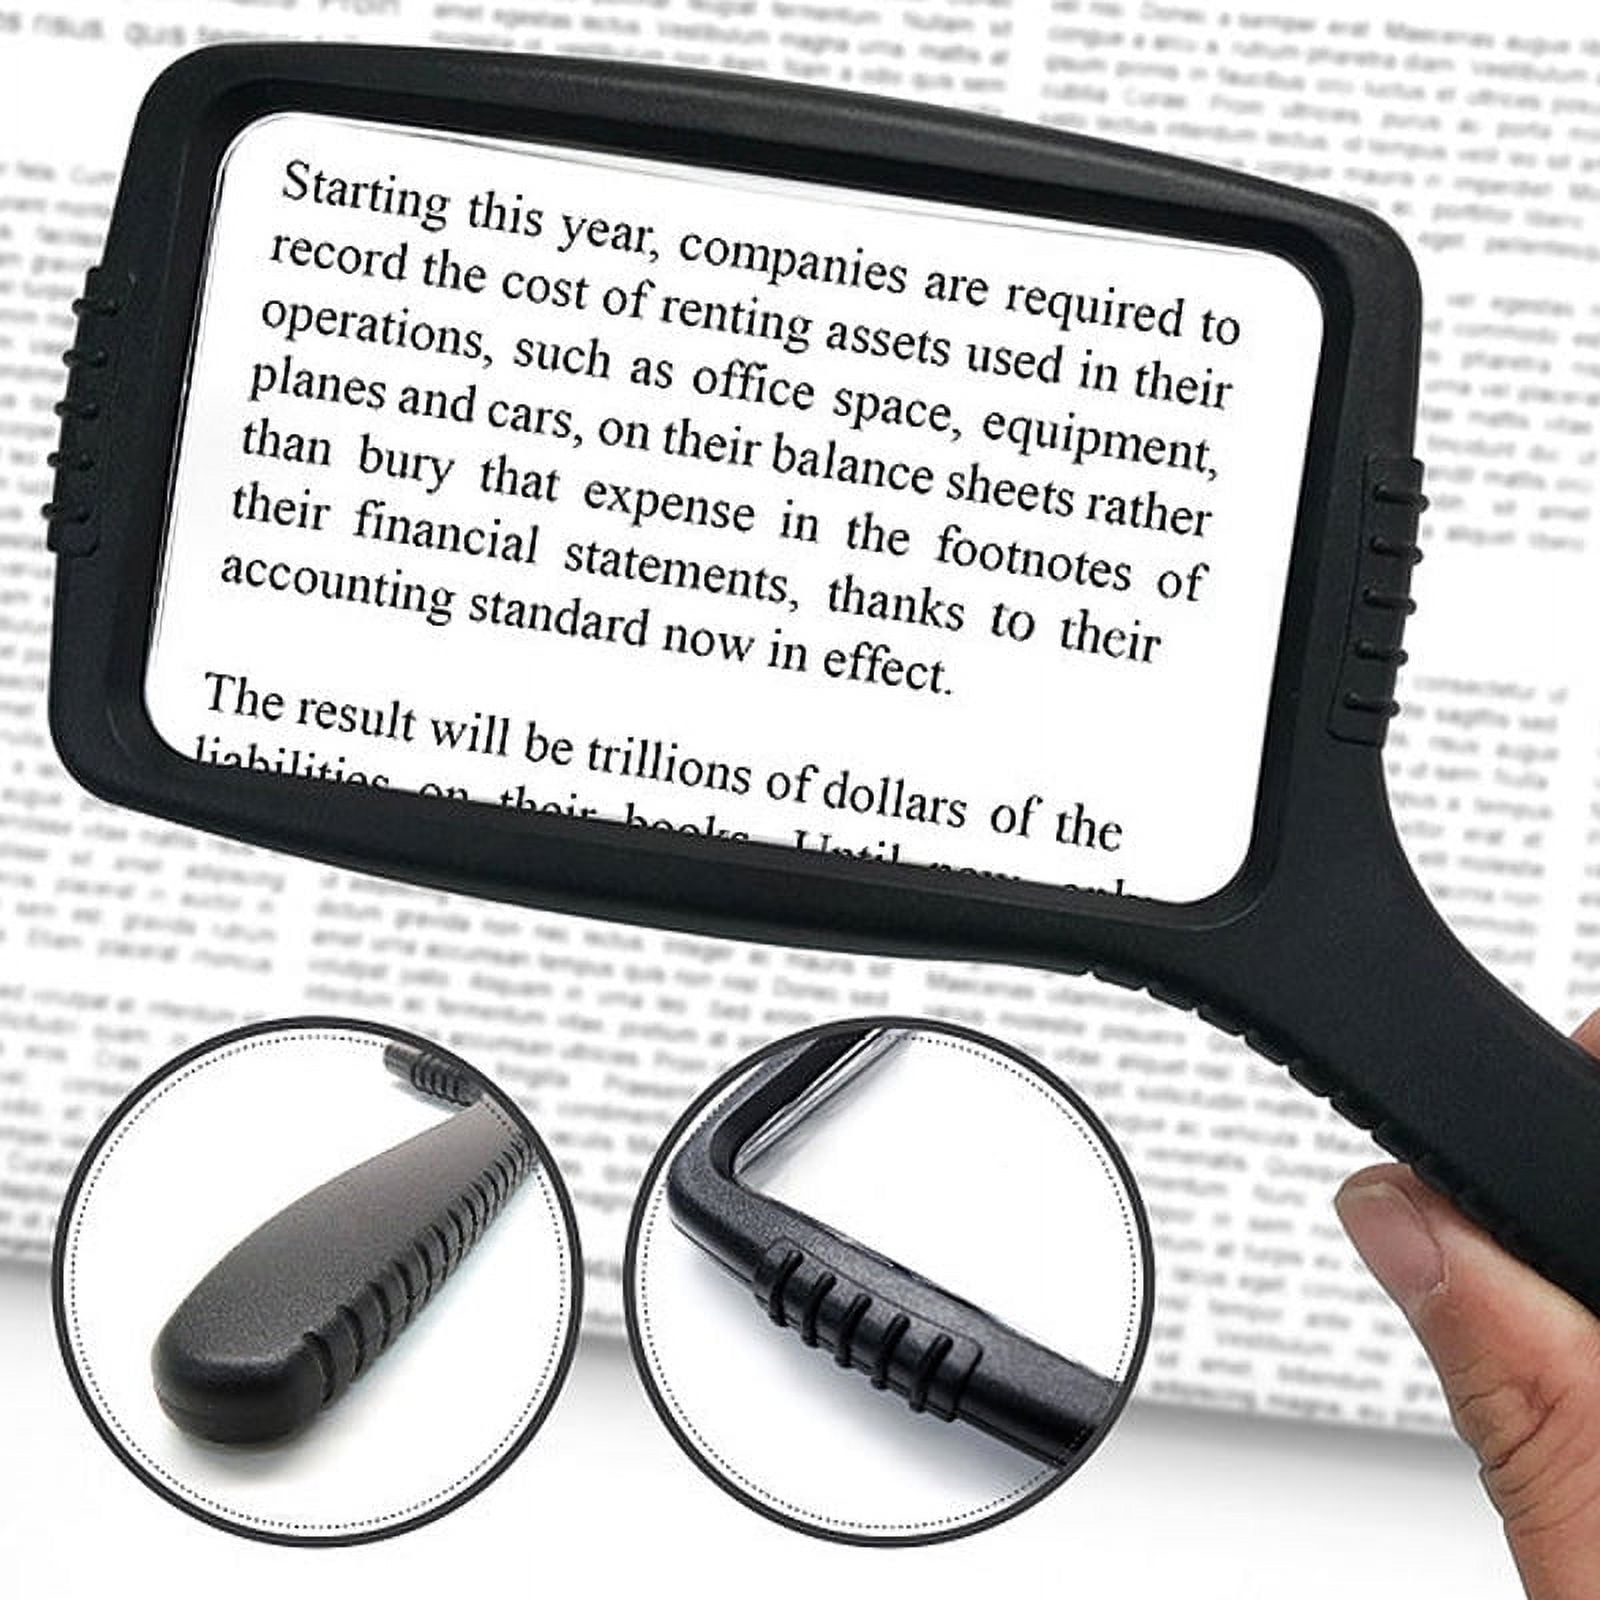 WJINNG Magnifying Glass, Handheld Magnifier, 3X Magnifying Glass for  Reading, 90mm Magnifying Glasses, with Removable Classical Wooden Handle  and